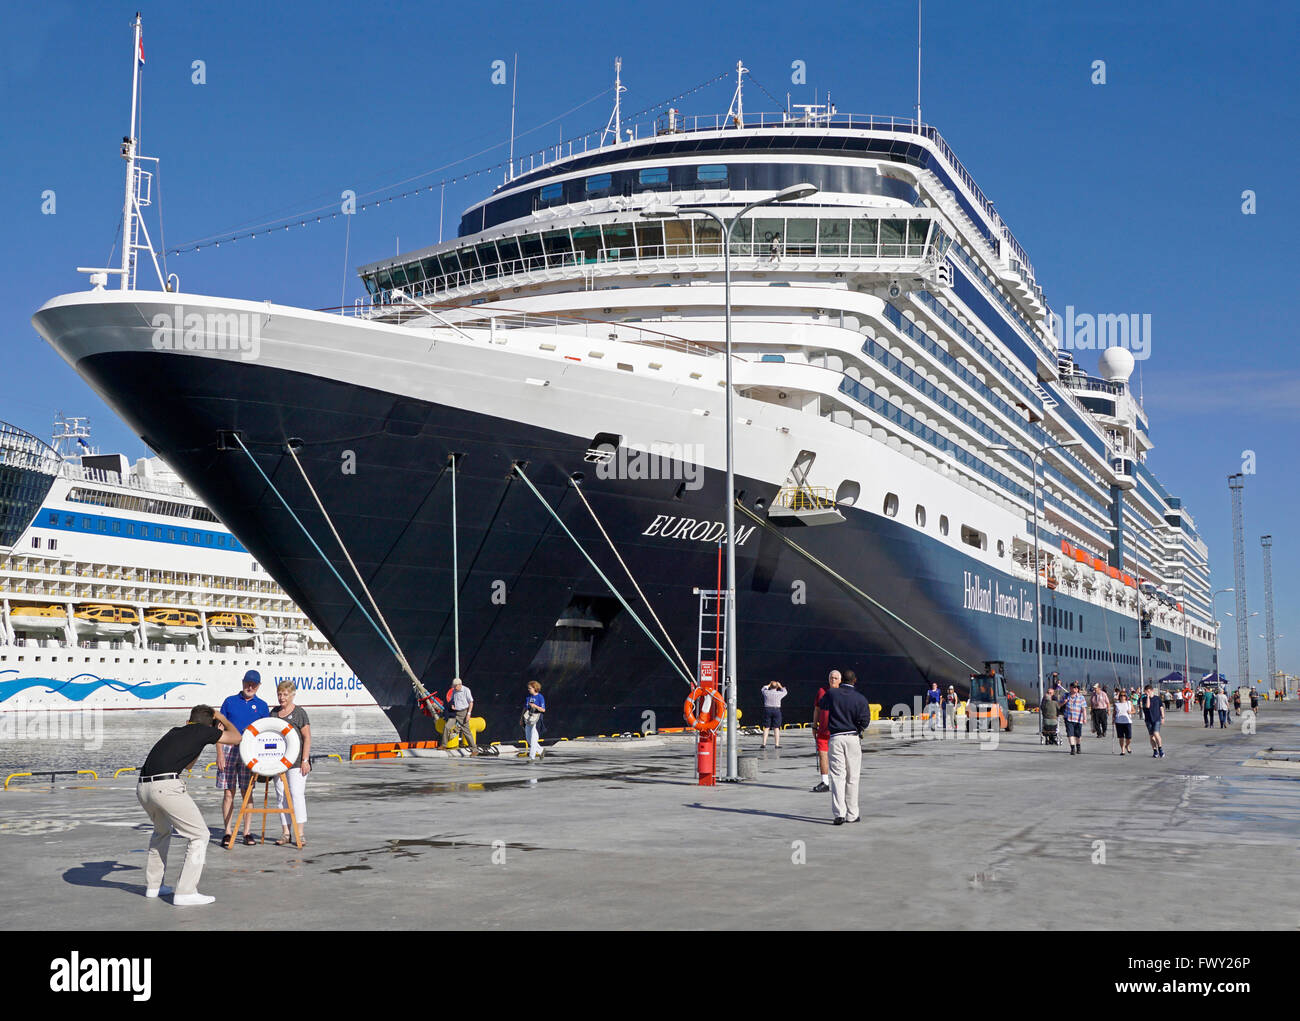 Cruise ship passengers being photogrphed by ship photographer upon arrivel in port of Tallinn, Estonia. Stock Photo